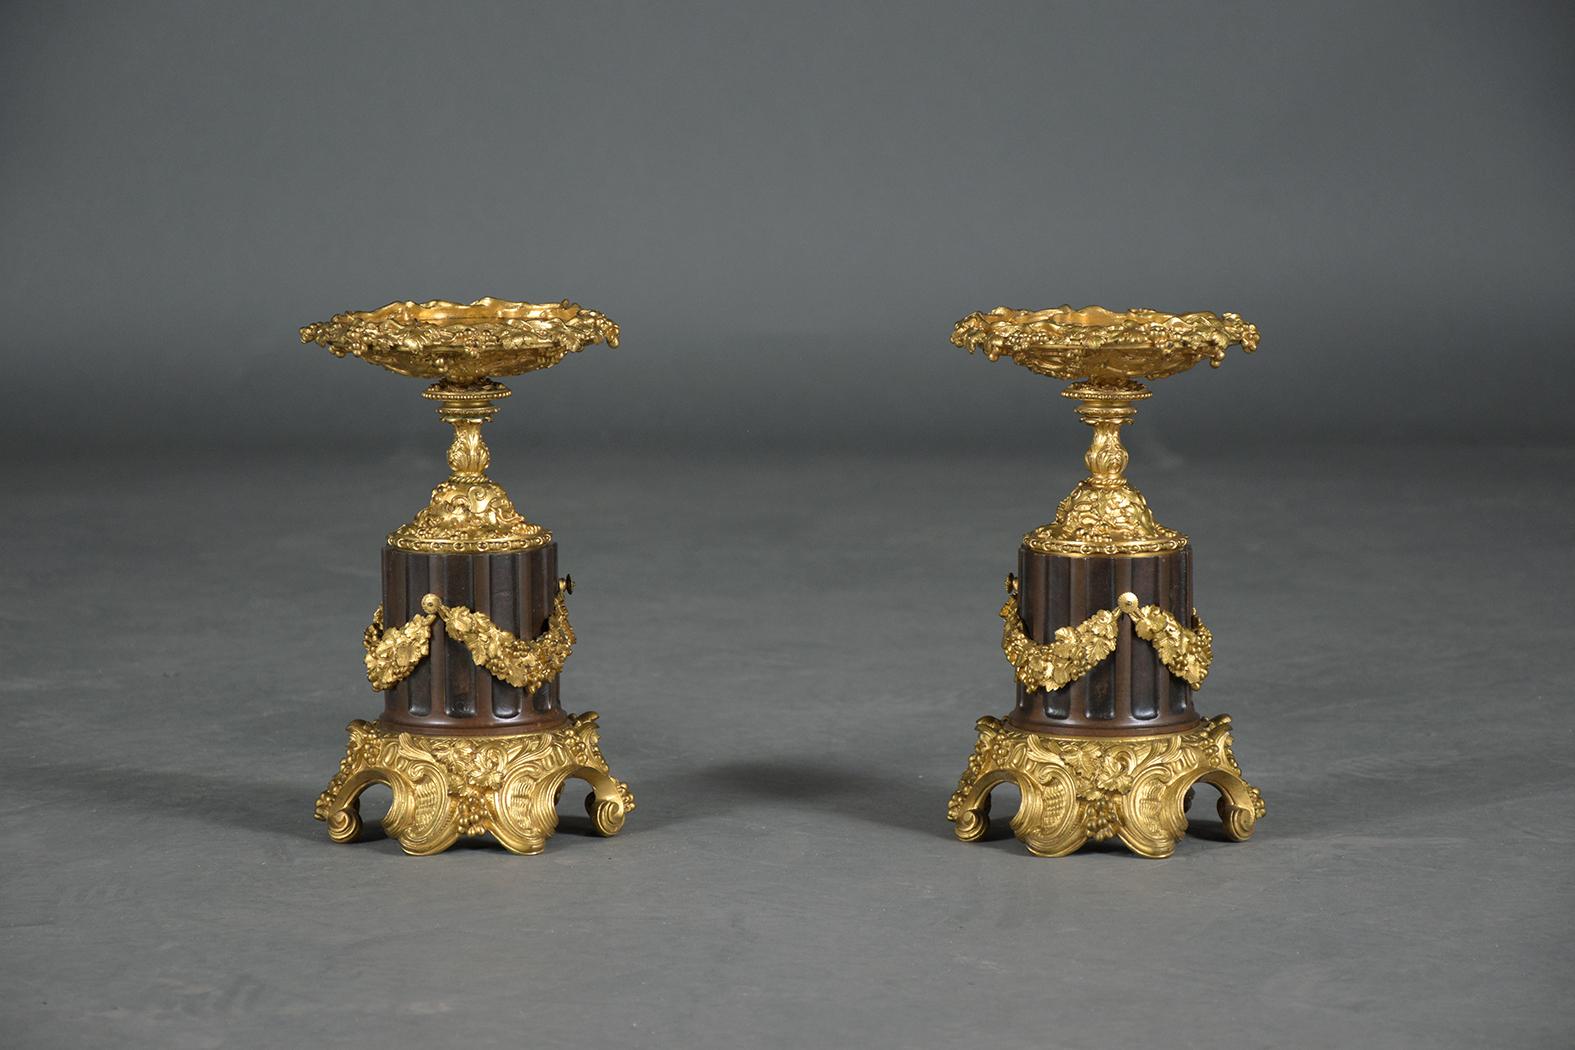 Empire Elegant 19th-Century French Bronzed Urns with Gold Ormolu Details For Sale